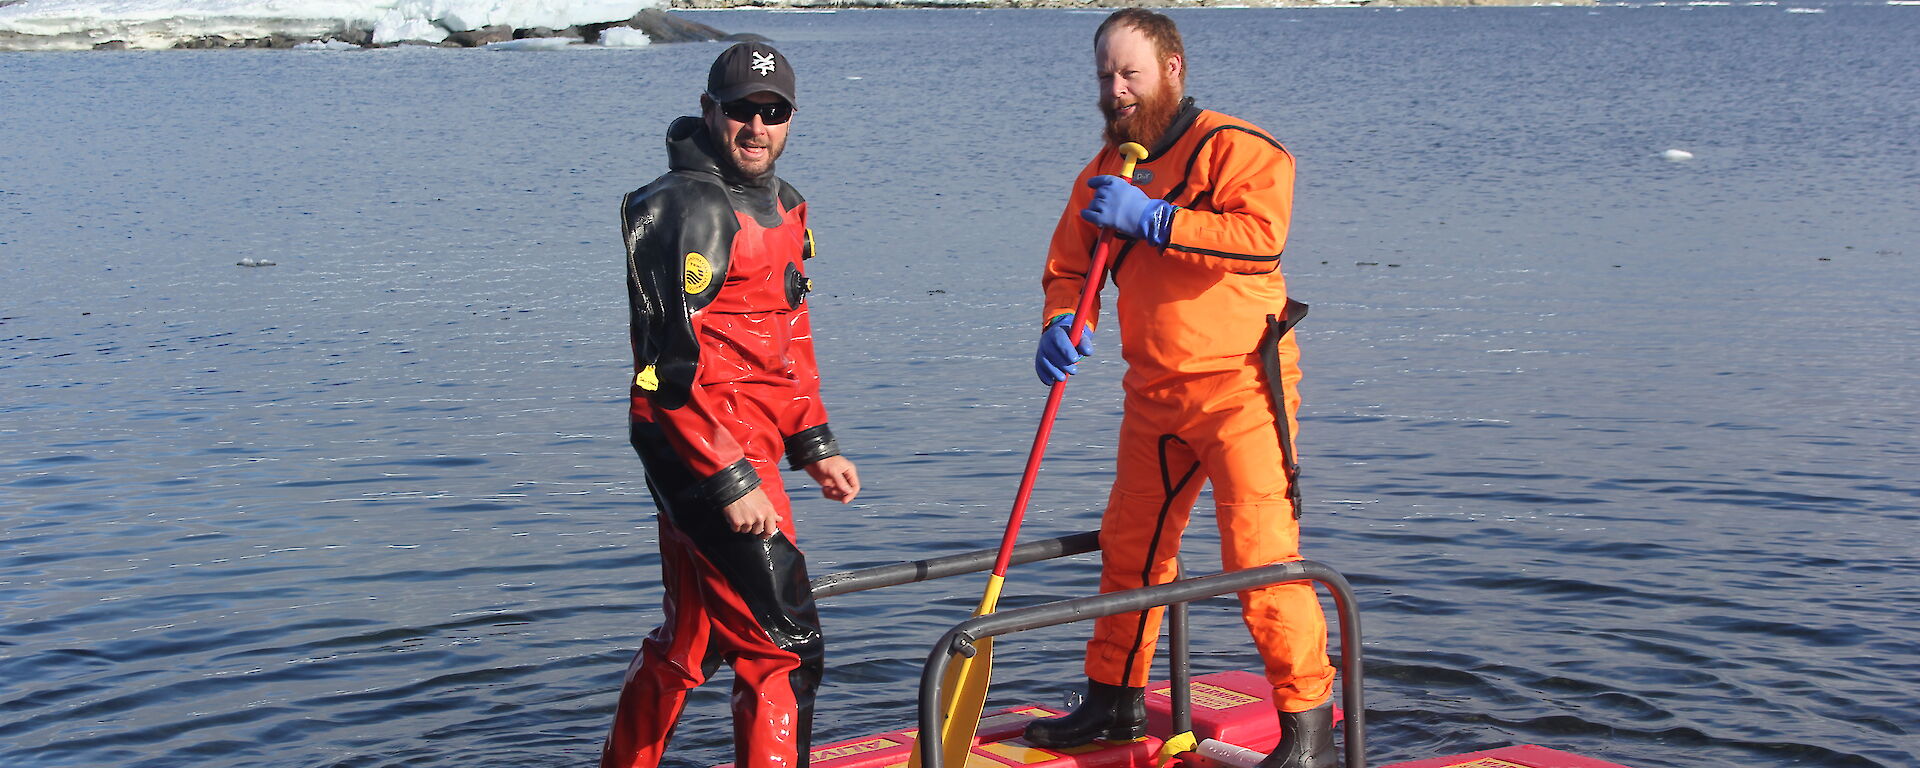 Two expeditioners wearing drysuits standing on a raft on the water